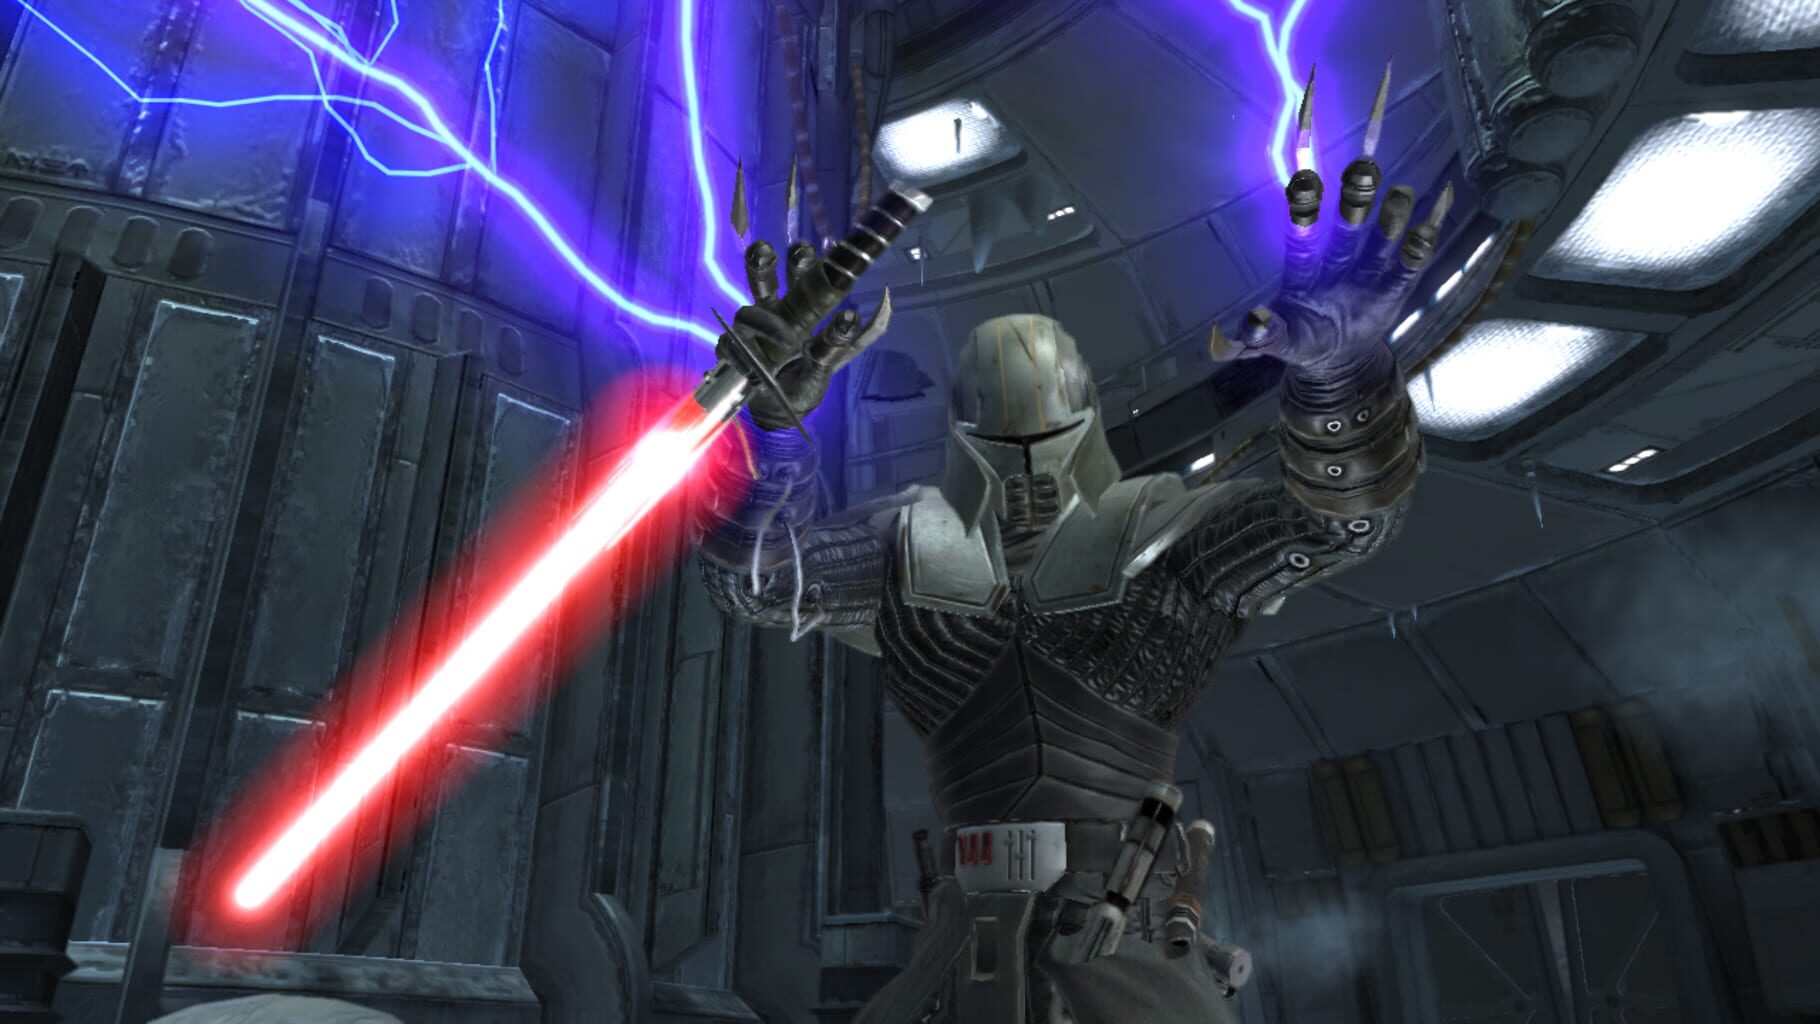 Captura de pantalla - Star Wars: The Force Unleashed - Hoth Mission Pack